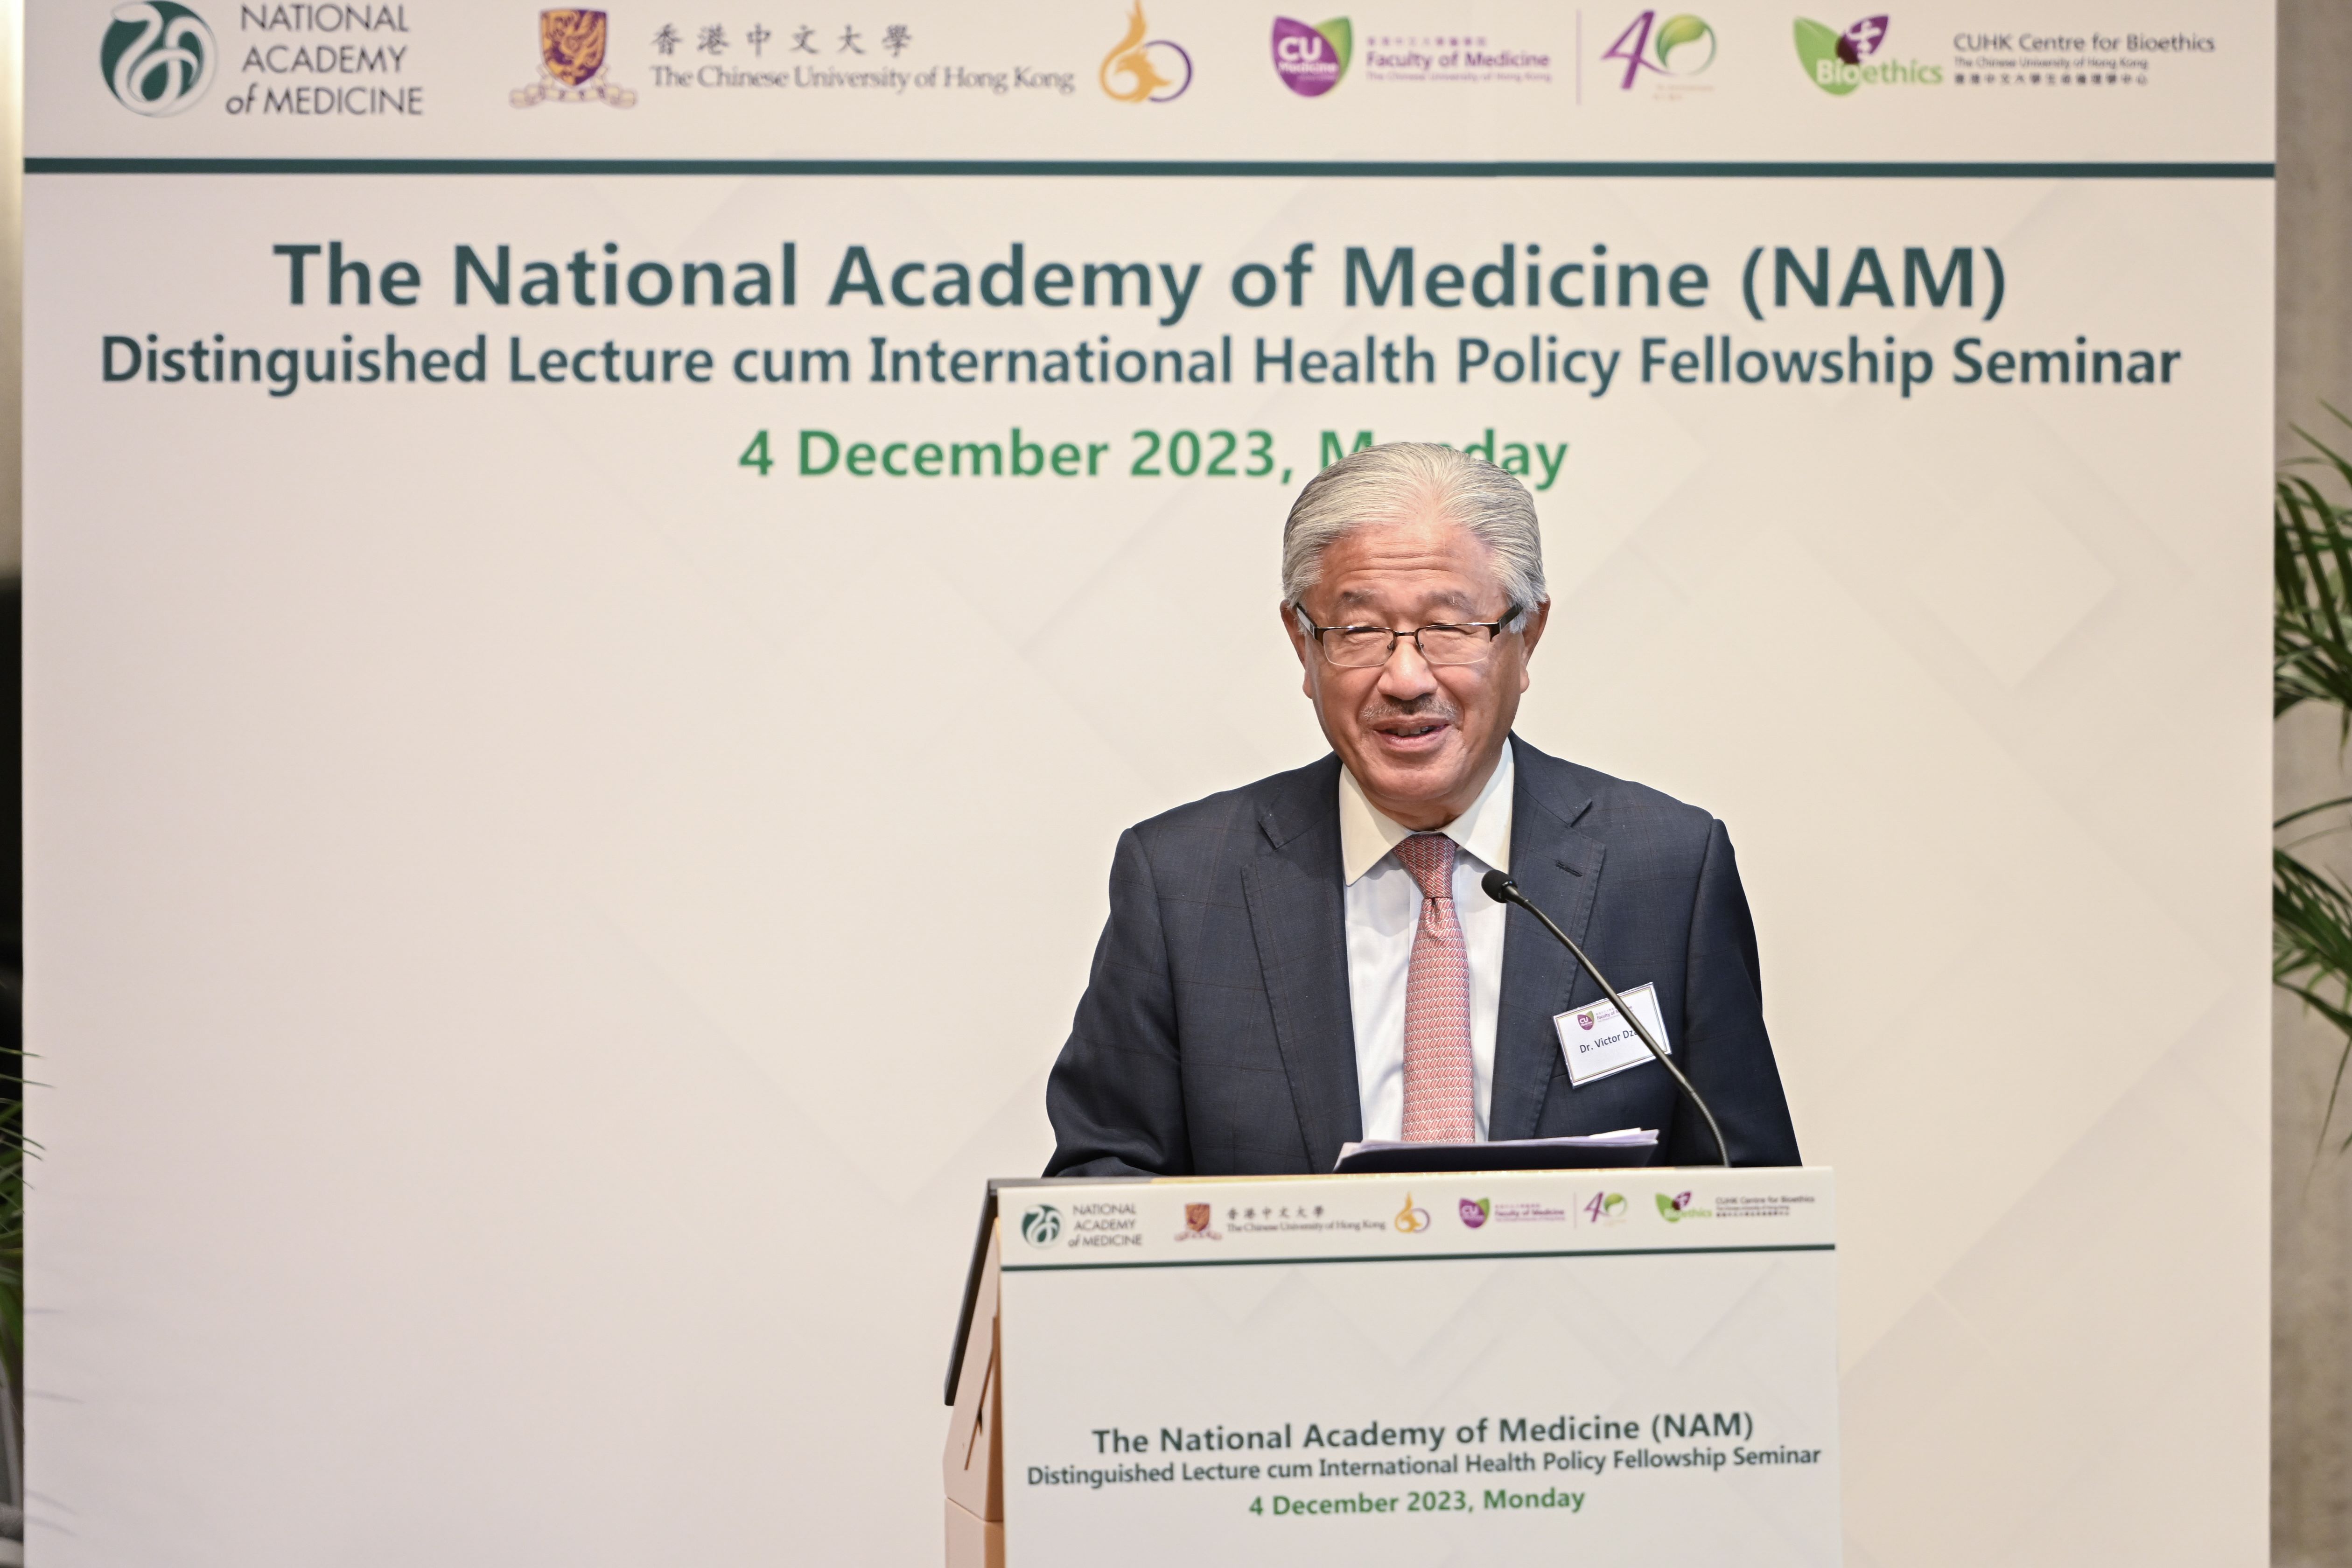 Dr Victor Dzau, President of the National Academy of Medicine delivers a welcome message and a distinguished lecture on ‘Science, Medicine, and Society: A Brave New World’.